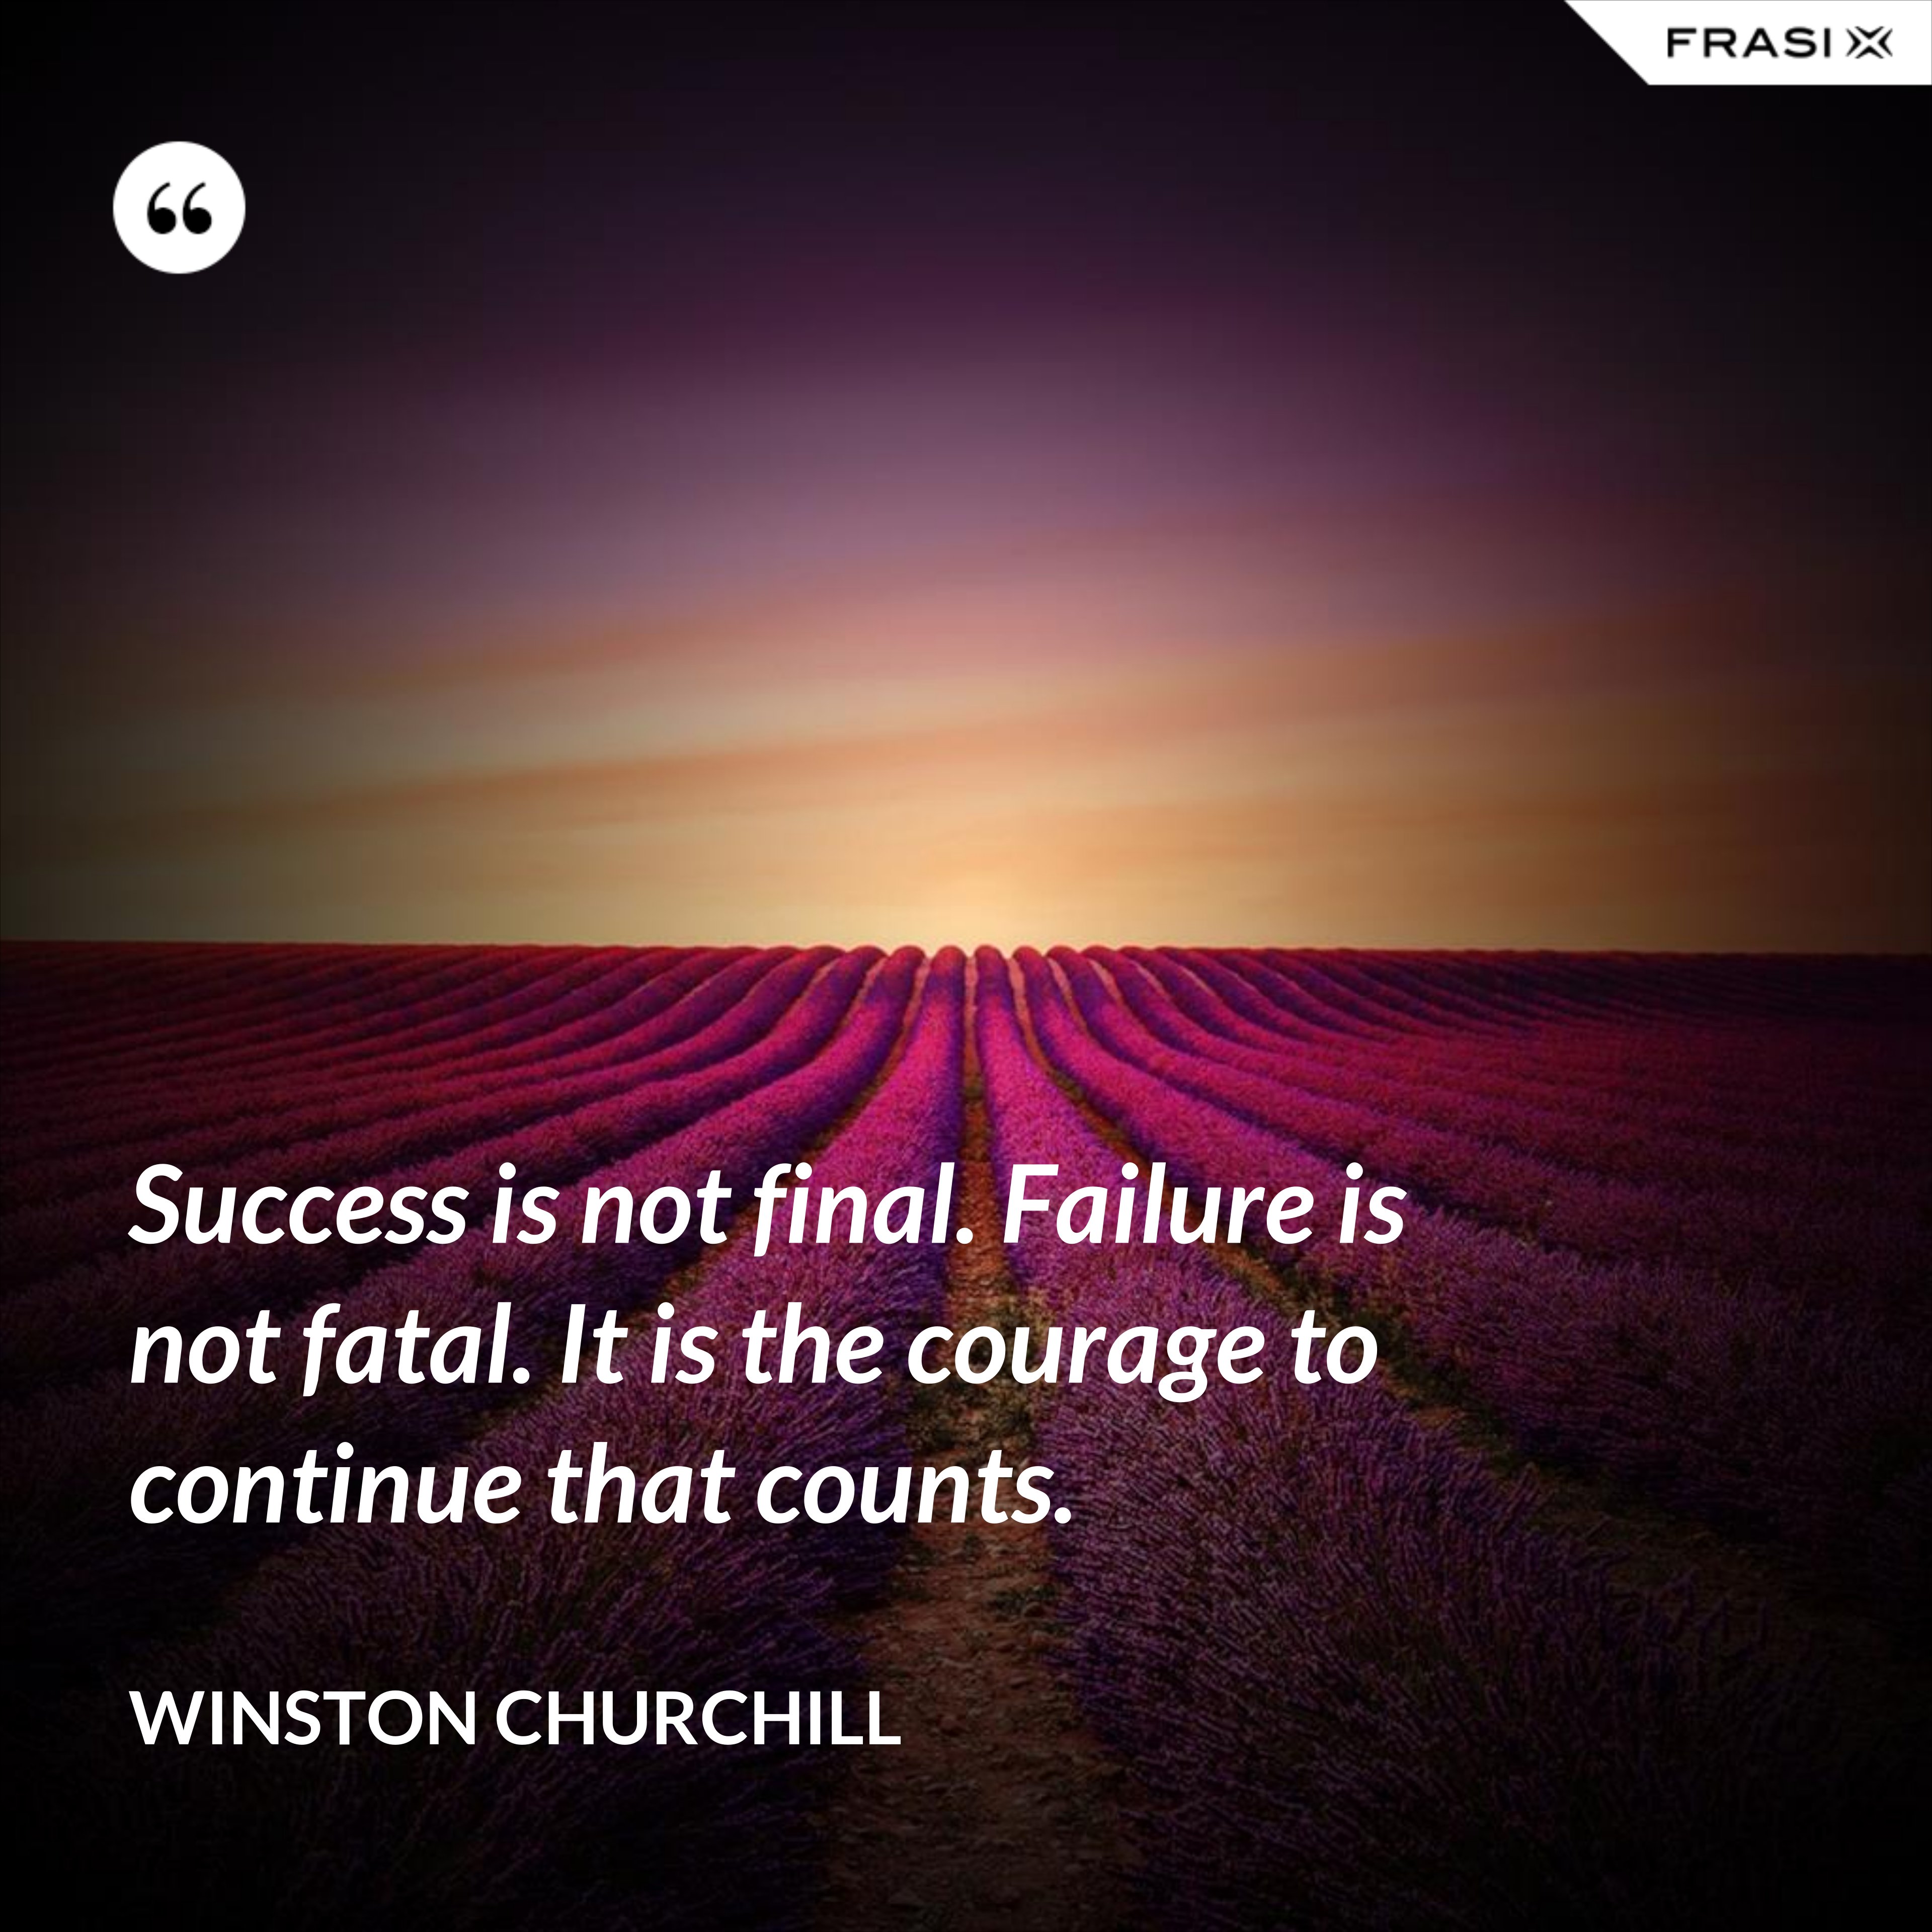 Success is not final. Failure is not fatal. It is the courage to continue that counts. - Winston Churchill